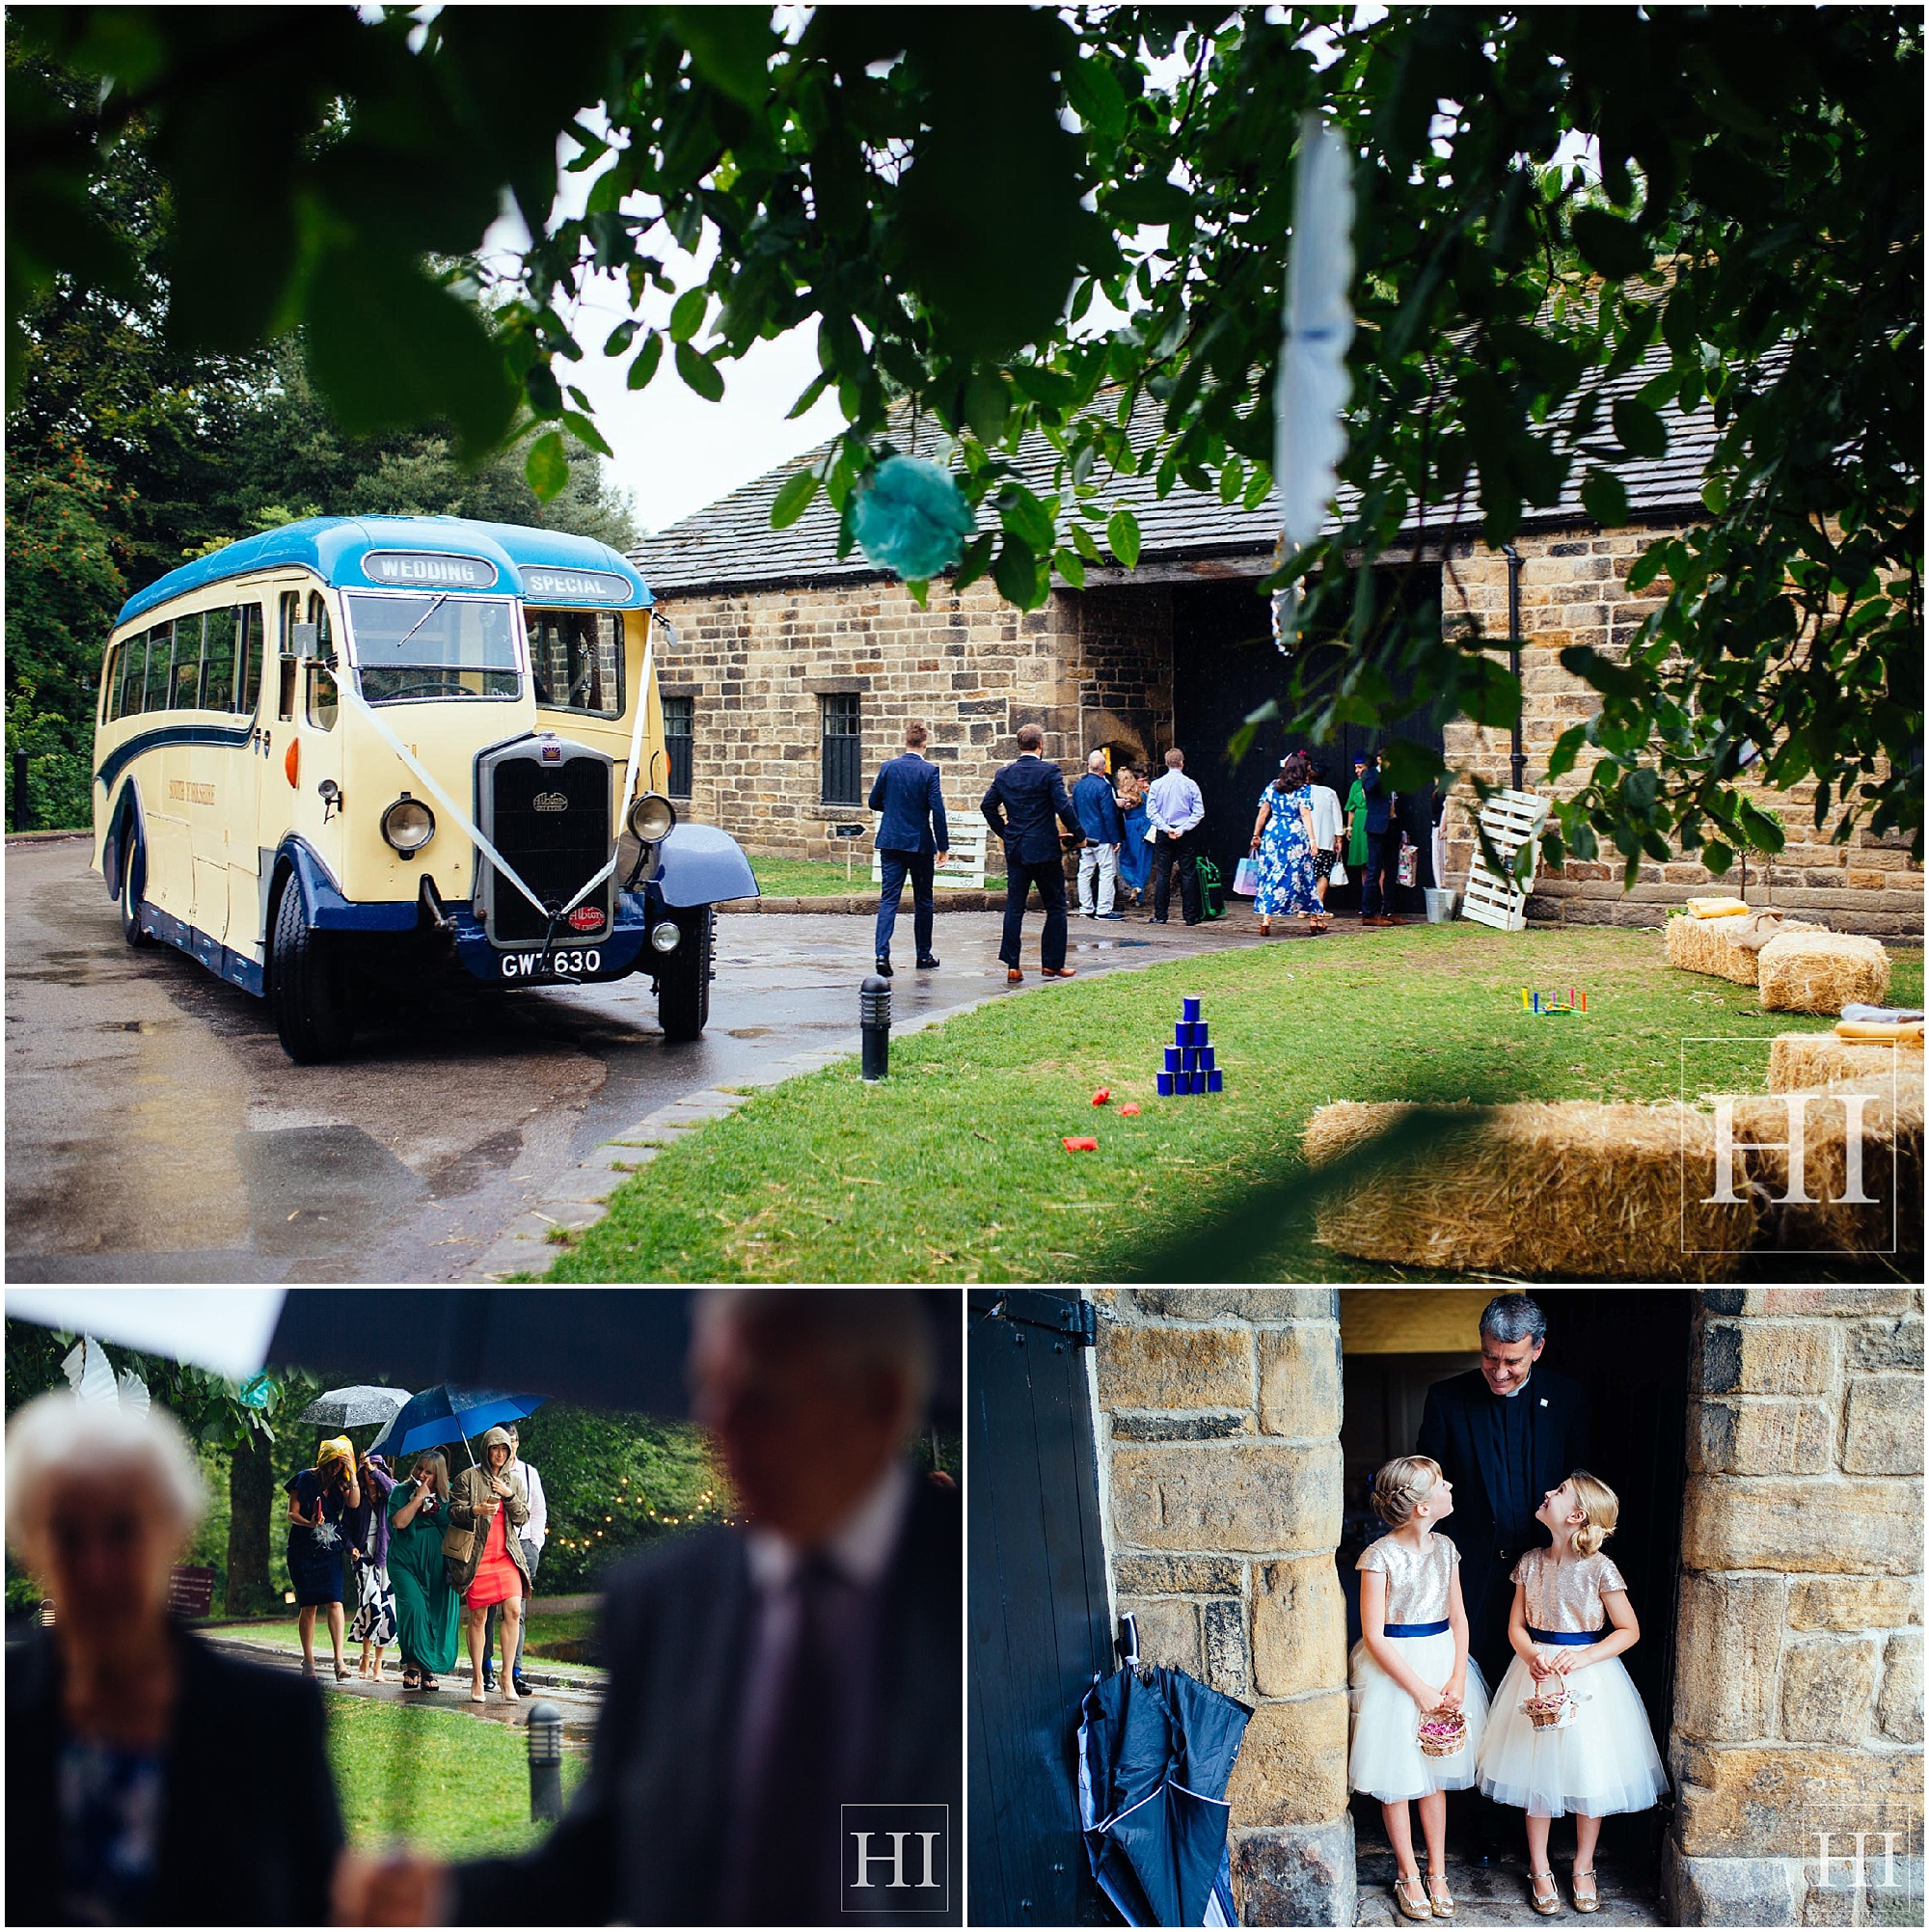 East Riddlesden Hall Wedding Photography Hamish Irvine Photographer Hamish Irvine photography yorkshire wedding photographers yorkshire wedding venues leeds wedding photographer leeds wedding photography barn wedding photographer yorkshire barn wedding photographer national trust wedding same sex wedding photographer leeds same sex wedding gay wedding photographer same sex photography east riddlesden same sex wedding london wedding photographer same sex barn wedding eat me drink me caterers hollins hall hotel typical type 